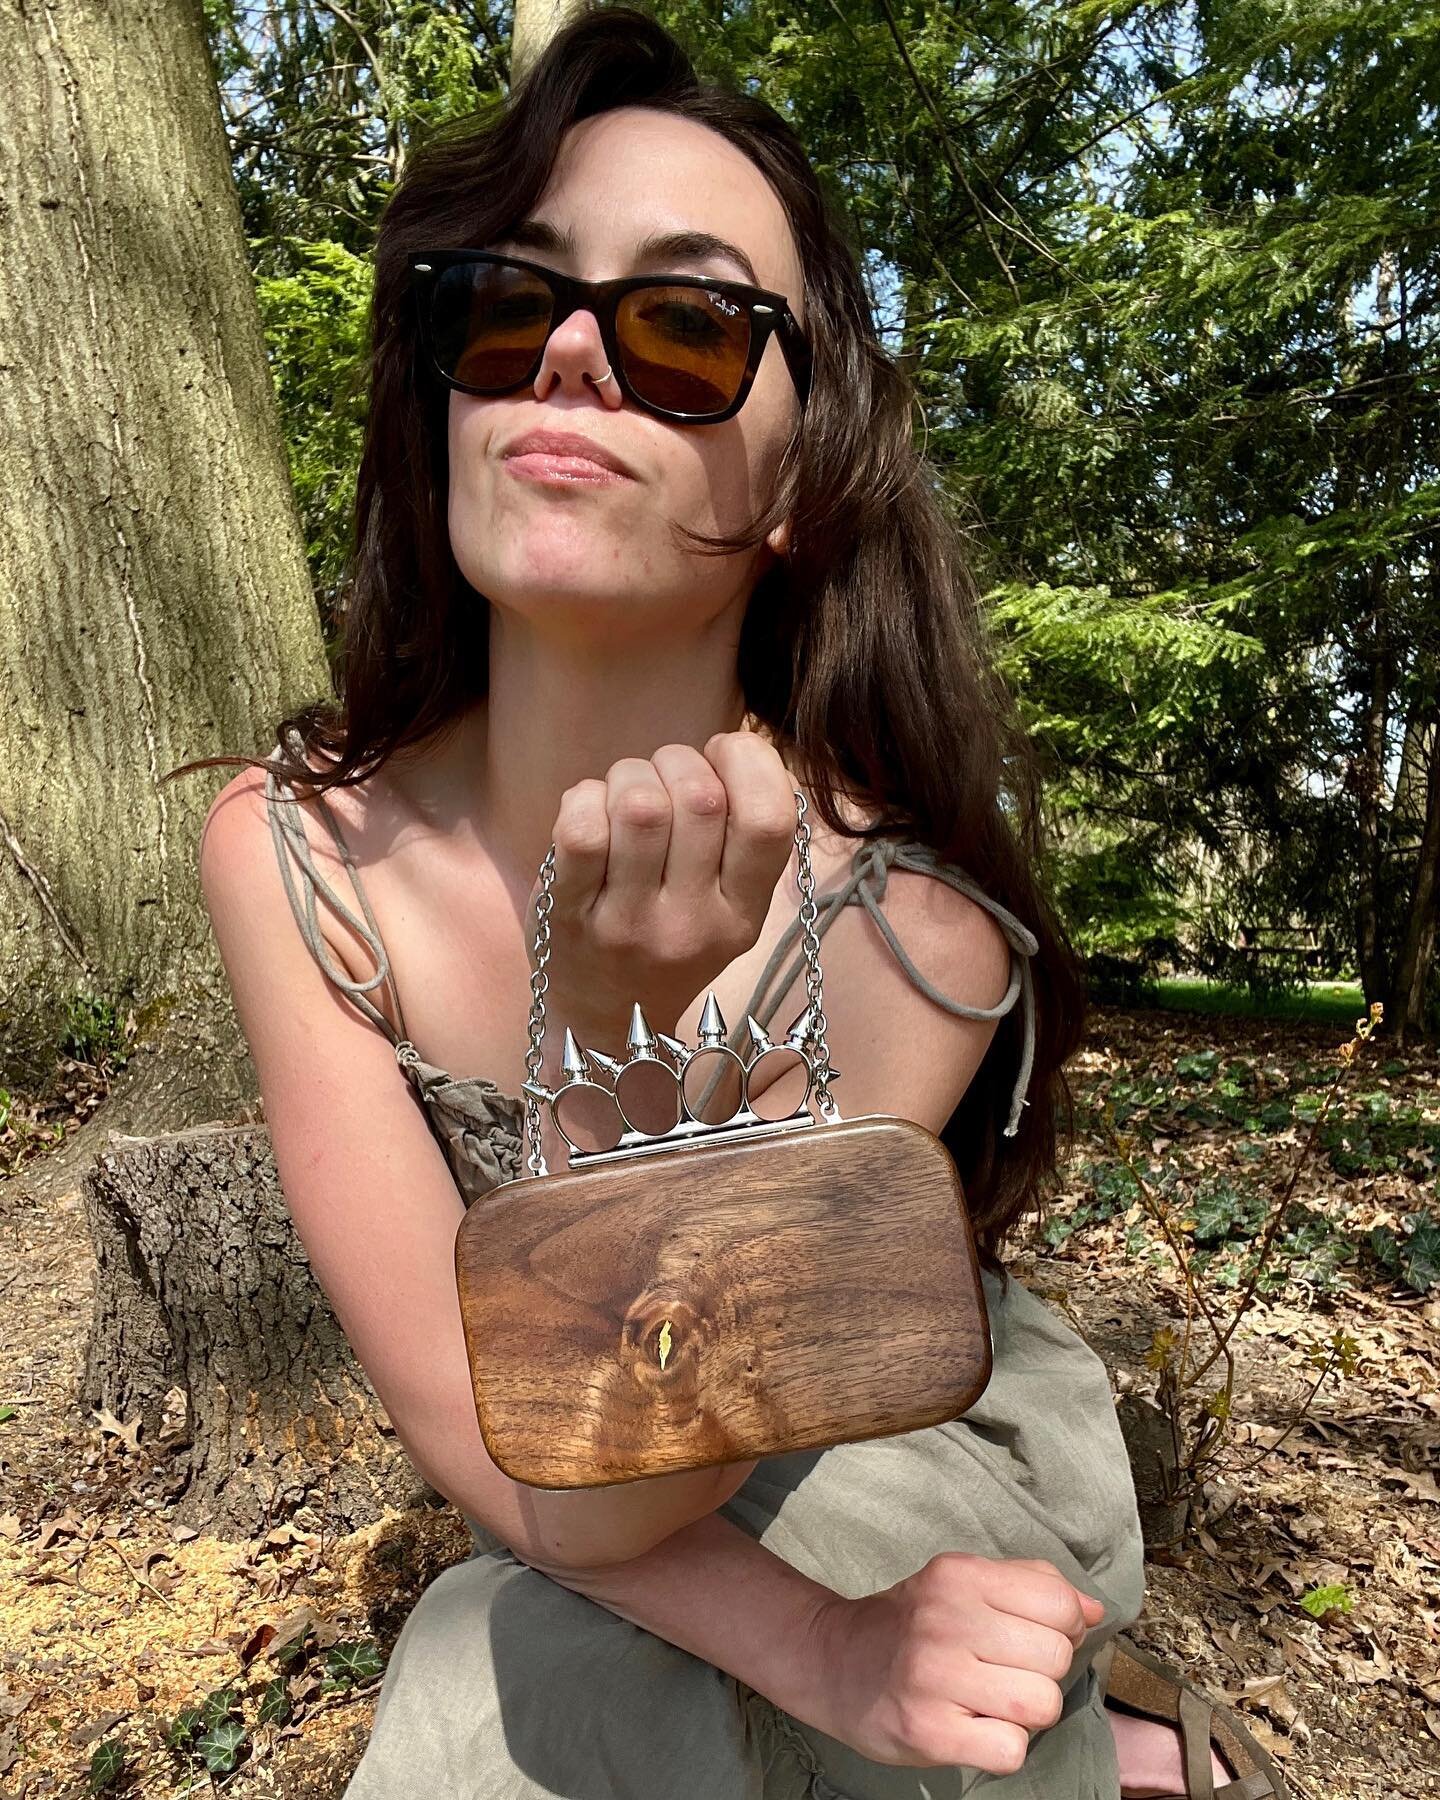 If you are seeking a fashion accessory that can double as a weapon, look no further, because this purse can be used in all your self-defense maneuvers. Deter frat boyz, muggers, and zombies while sporting this forest friendly clutch at your next&nbsp